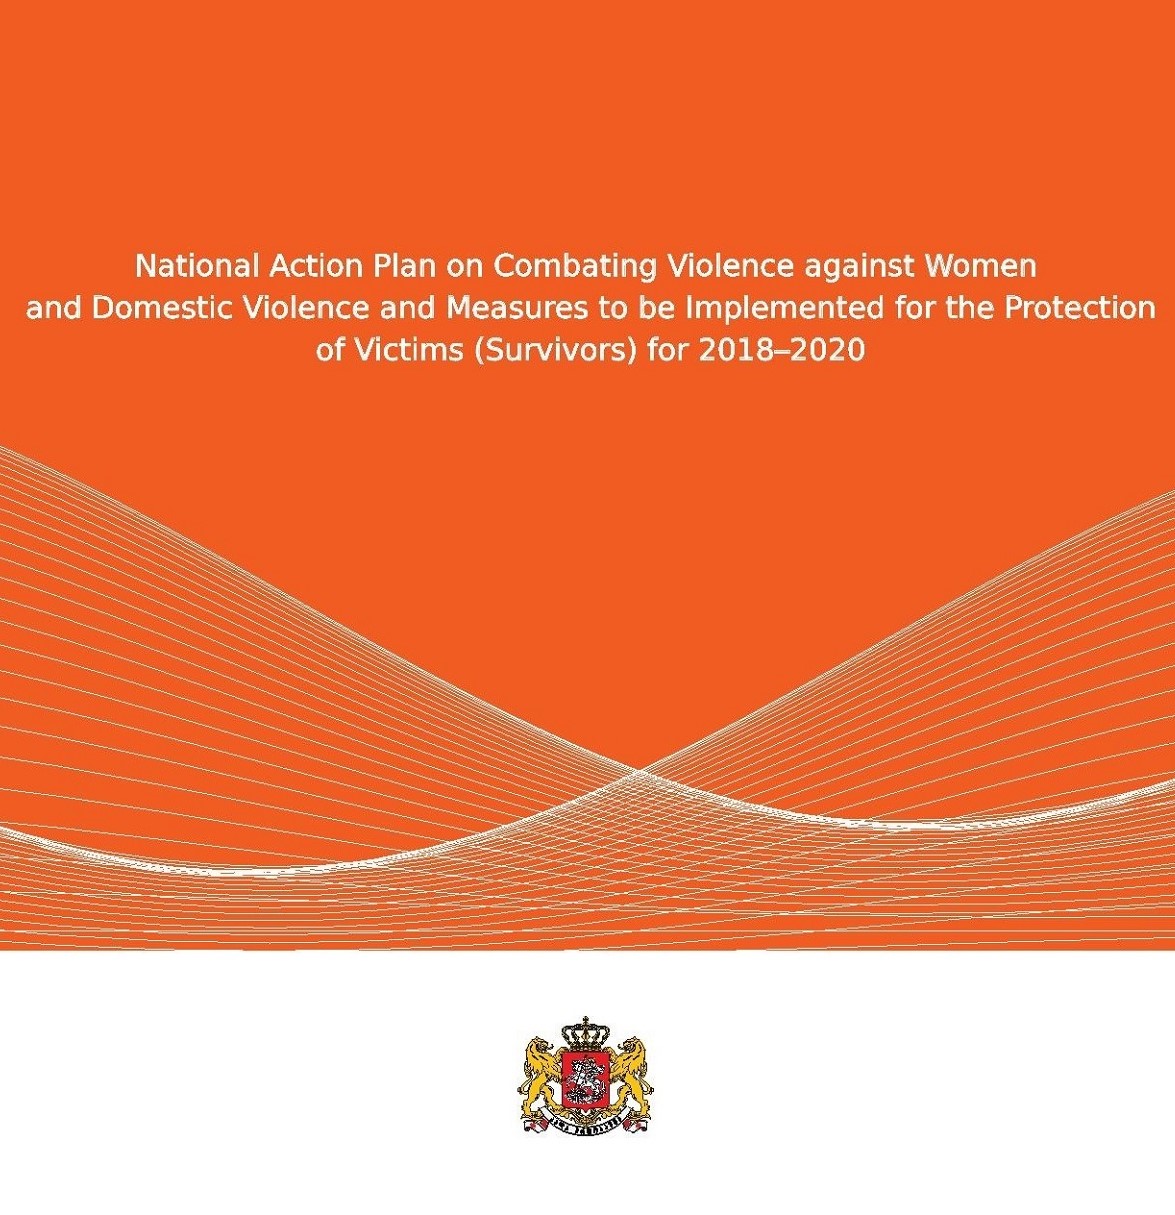 National Action Plan on Combating Violence against Women and Domestic Violence and Measures to be Implemented for the Protection of Victims (Survivors) for 2018-2020 